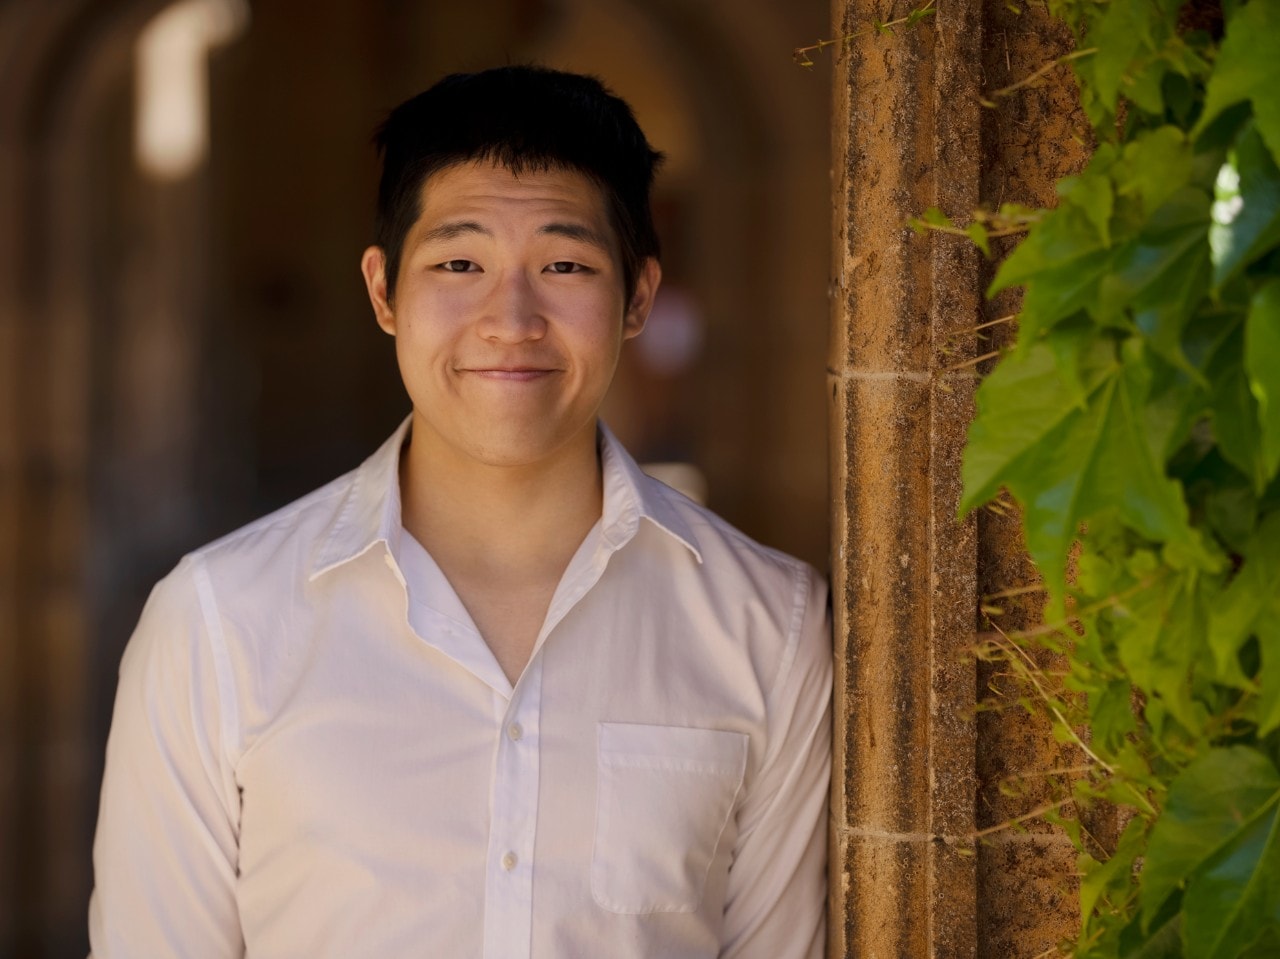 Joshua Wan wears a white shirt and stands beside a sandstone wall covered in ivy.